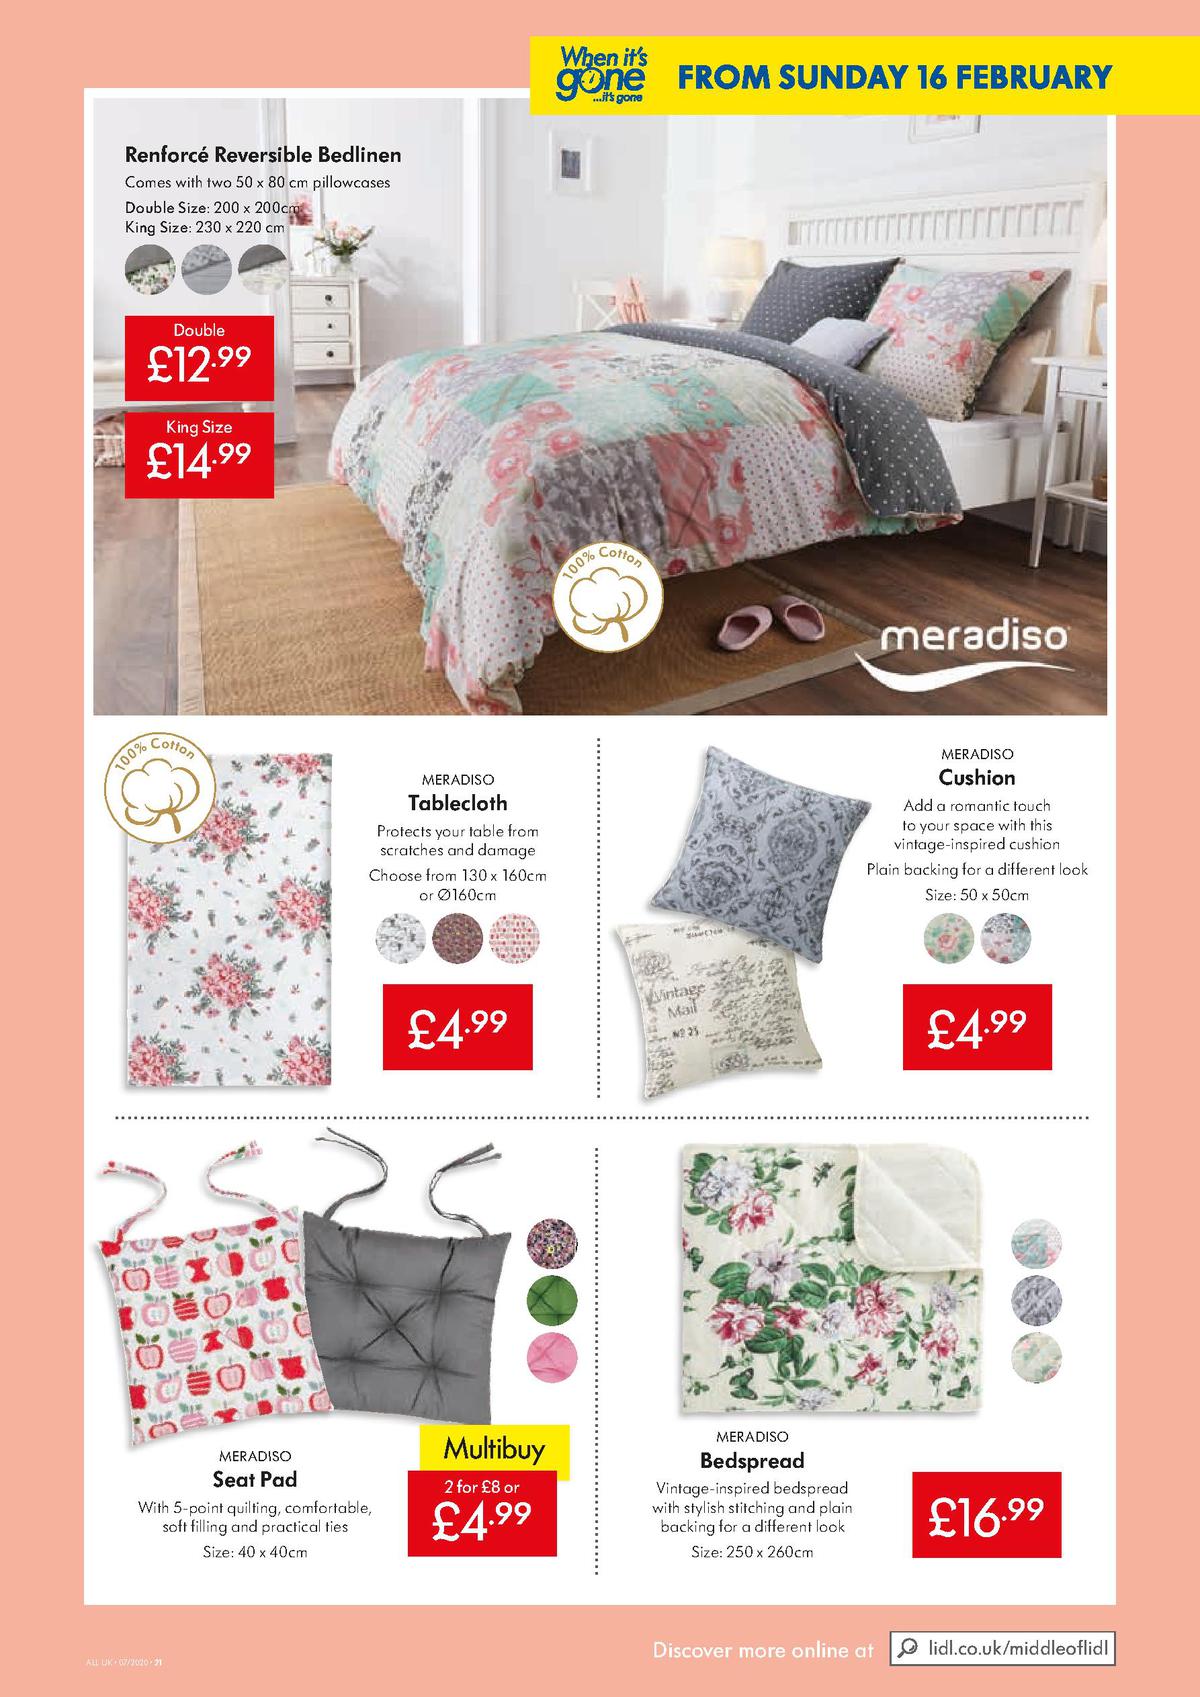 LIDL Offers from 13 February